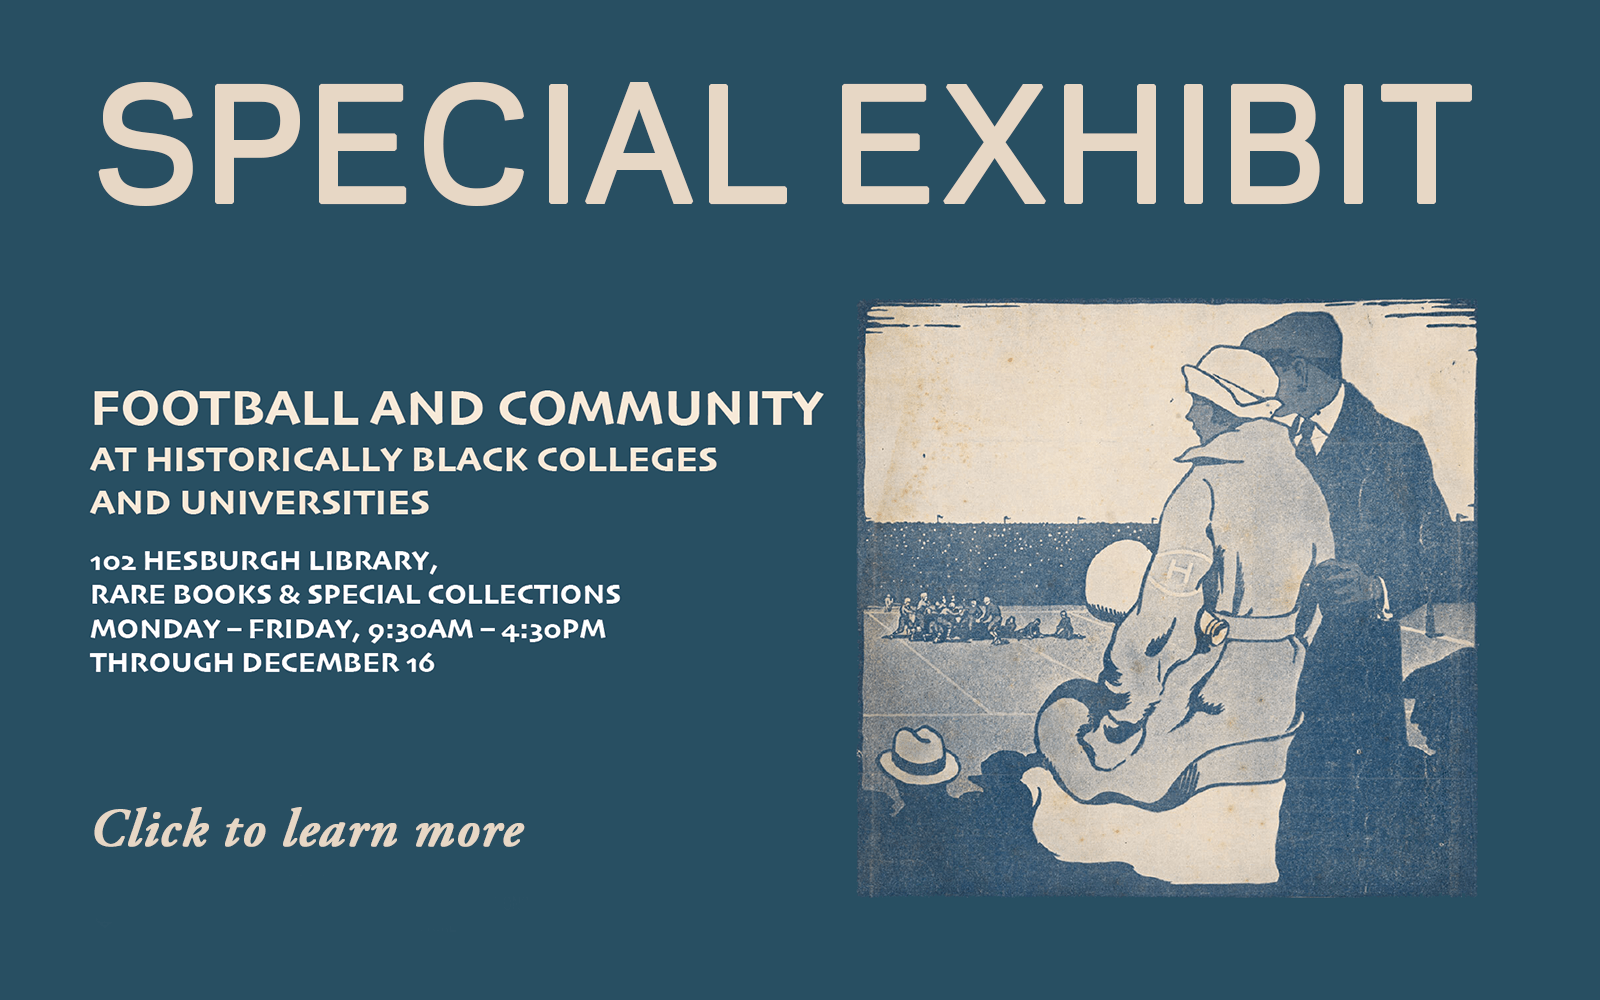 Graphic promoting the Department of Rare Books & Special Collections Exhibit on Football and Community at Historically Black Colleges and Universities which is on display in Hesburgh Library. 